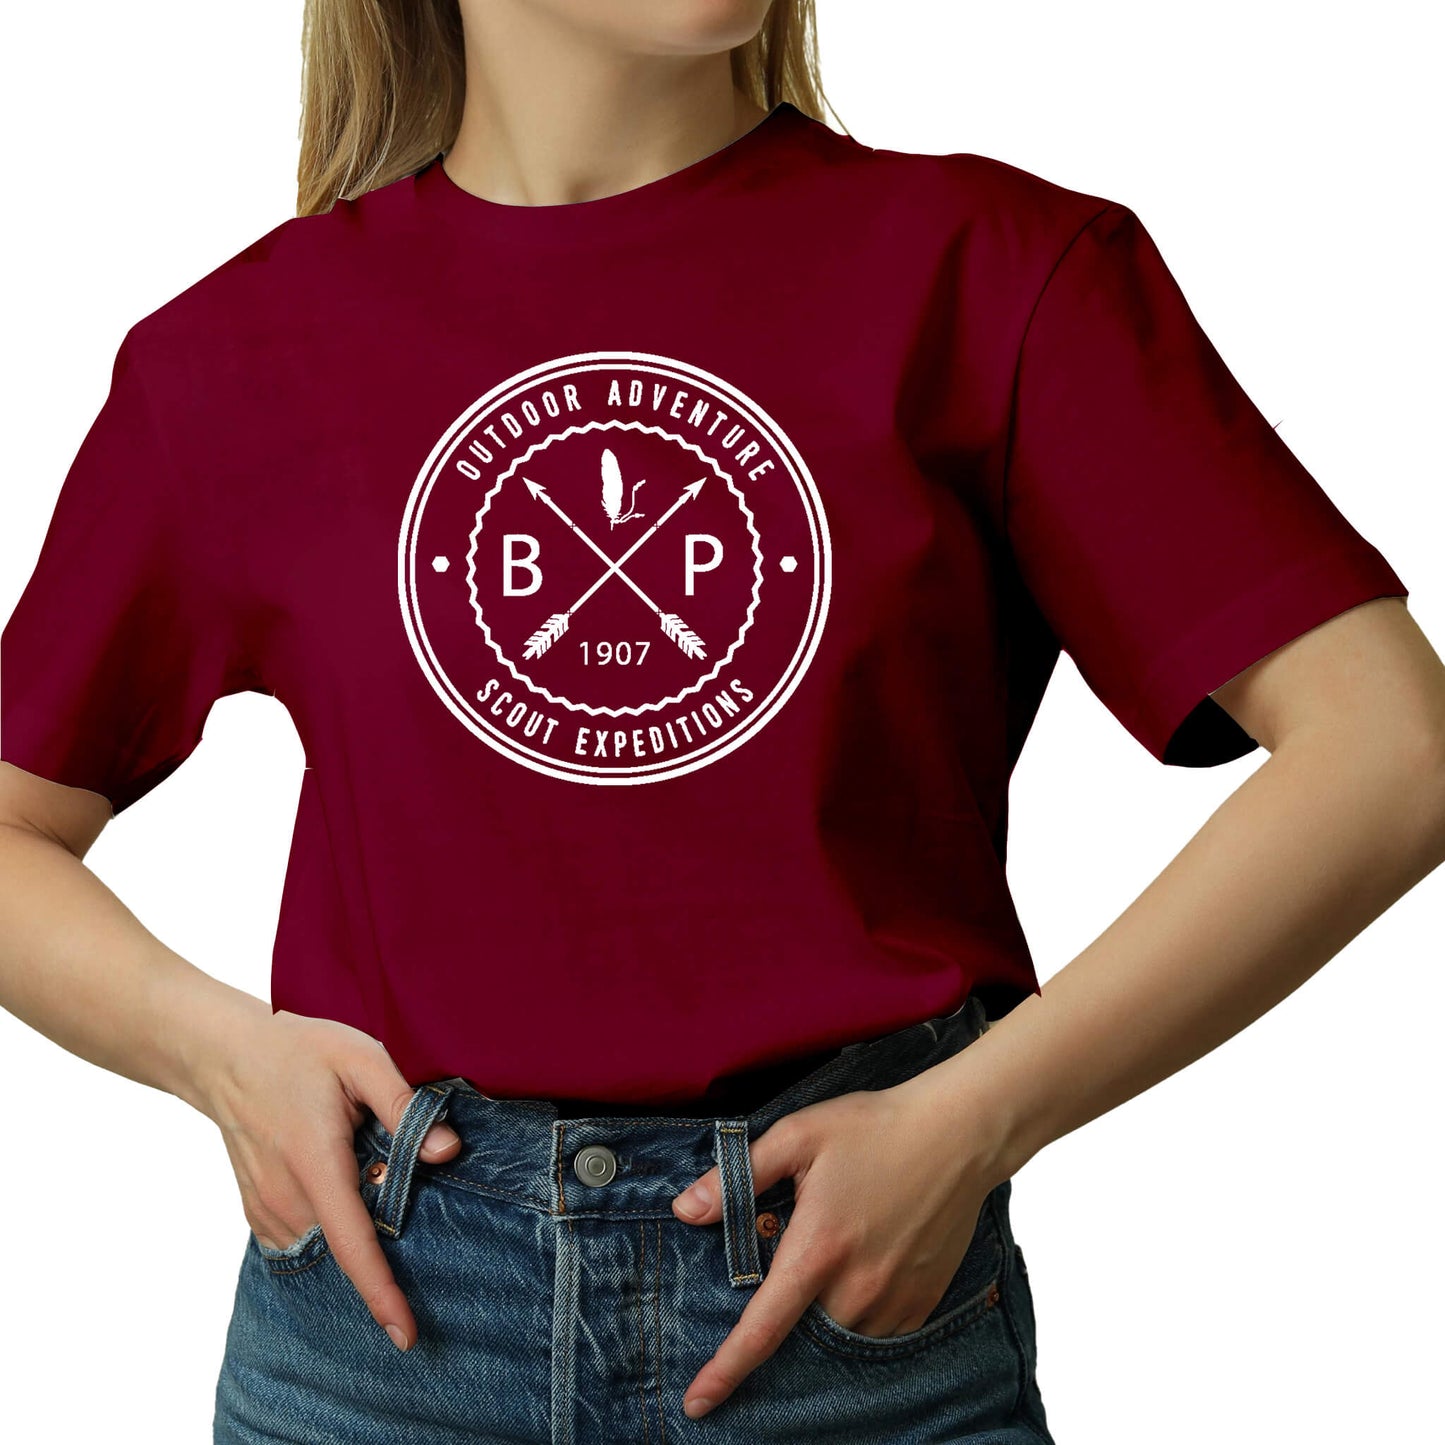 a  t shirt with the text out door adveture scout expeditions BP 1907 with crossed arrows.